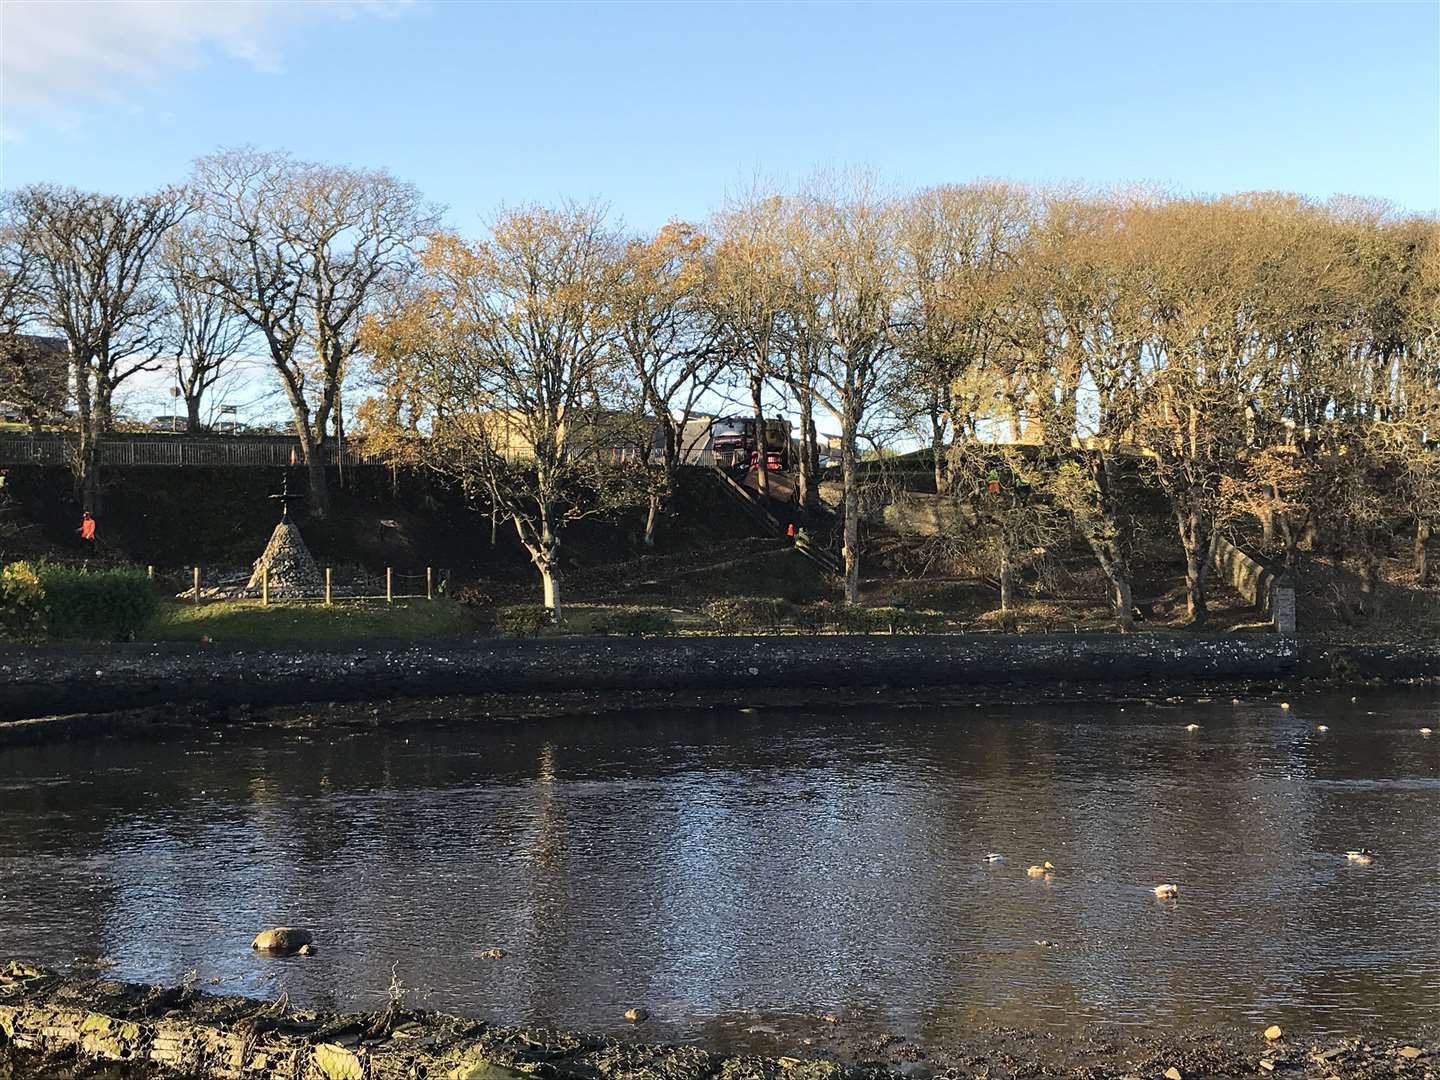 The project has made a visible difference not just to the riverside but to the town itself, says ScottishPower Renewables.